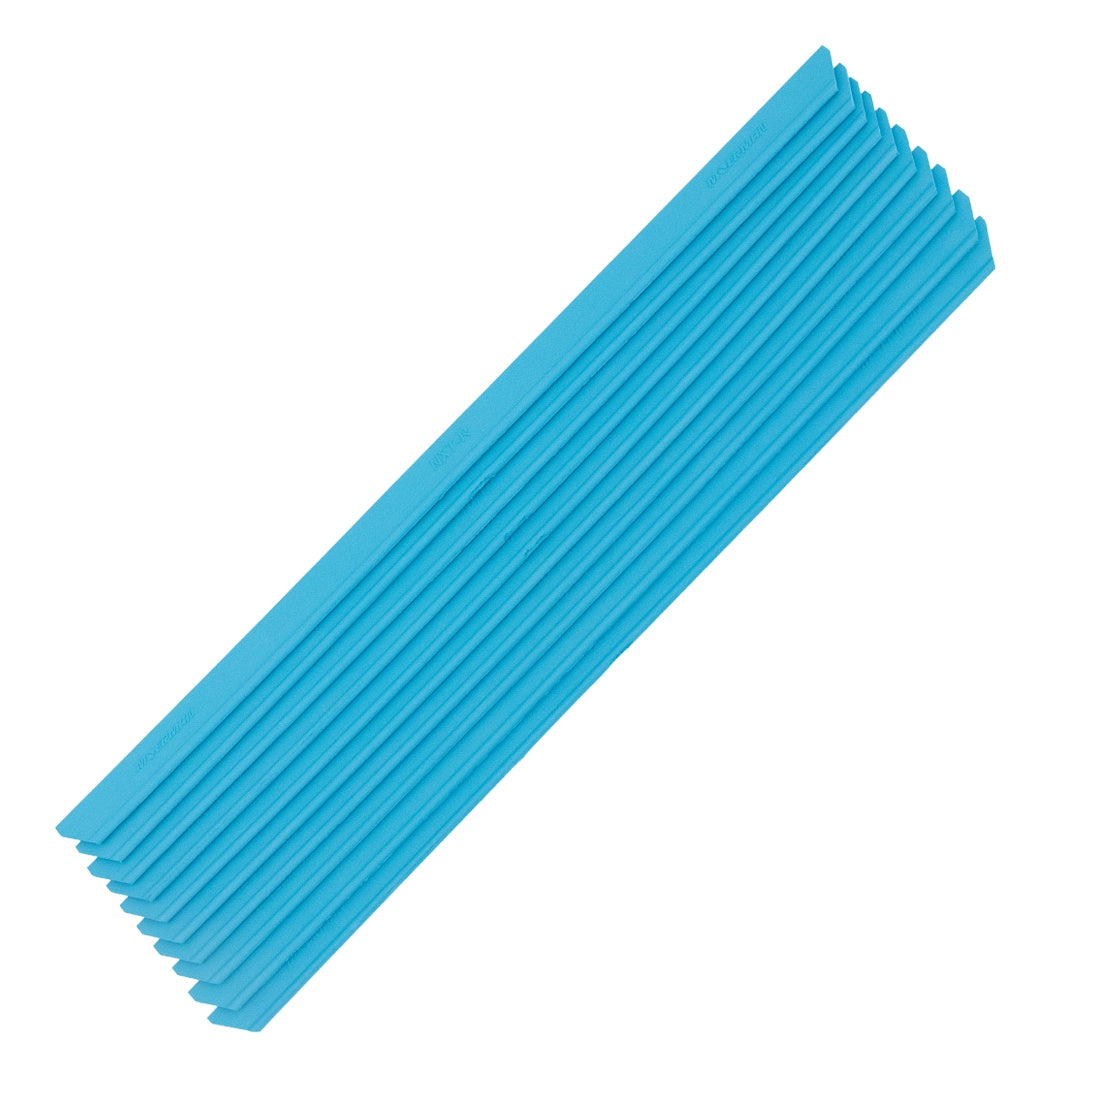 Moerman NXT-R Squeegee Rubber, Replacement Rubber